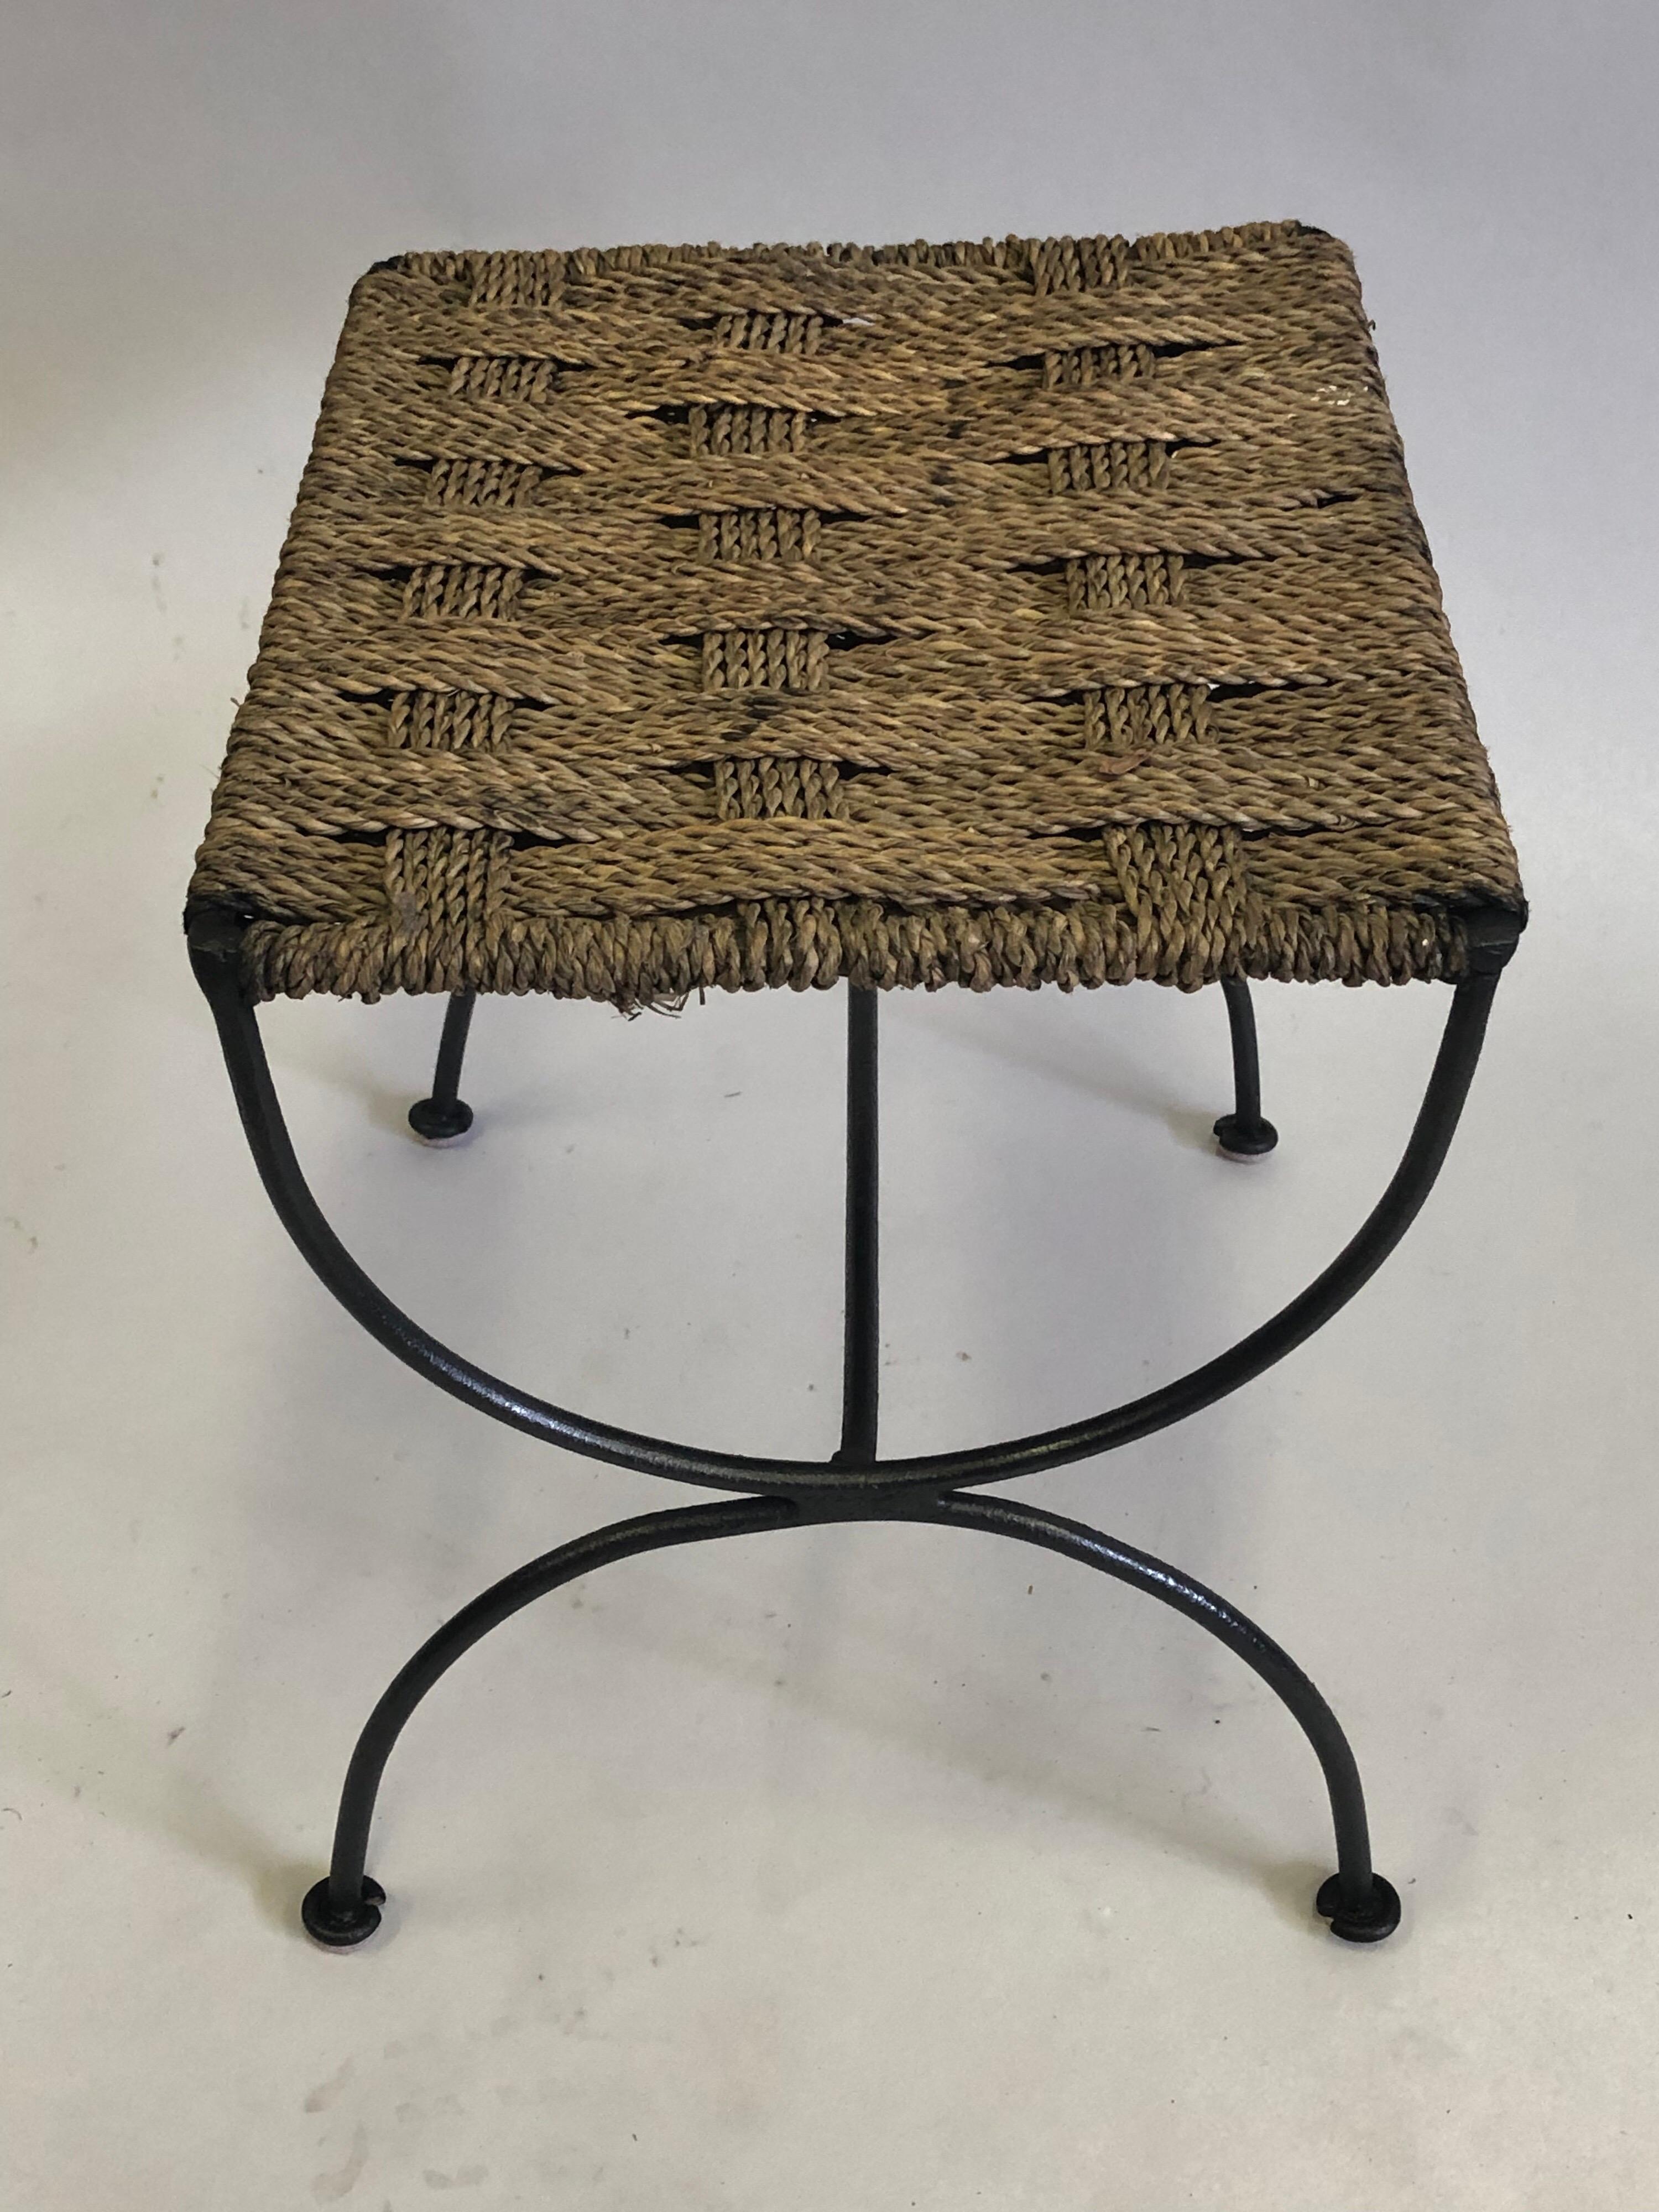 Pair of French Mid-Century Wrought Iron & Rope Stools / Benches, Audoux & Minet. For Sale 4